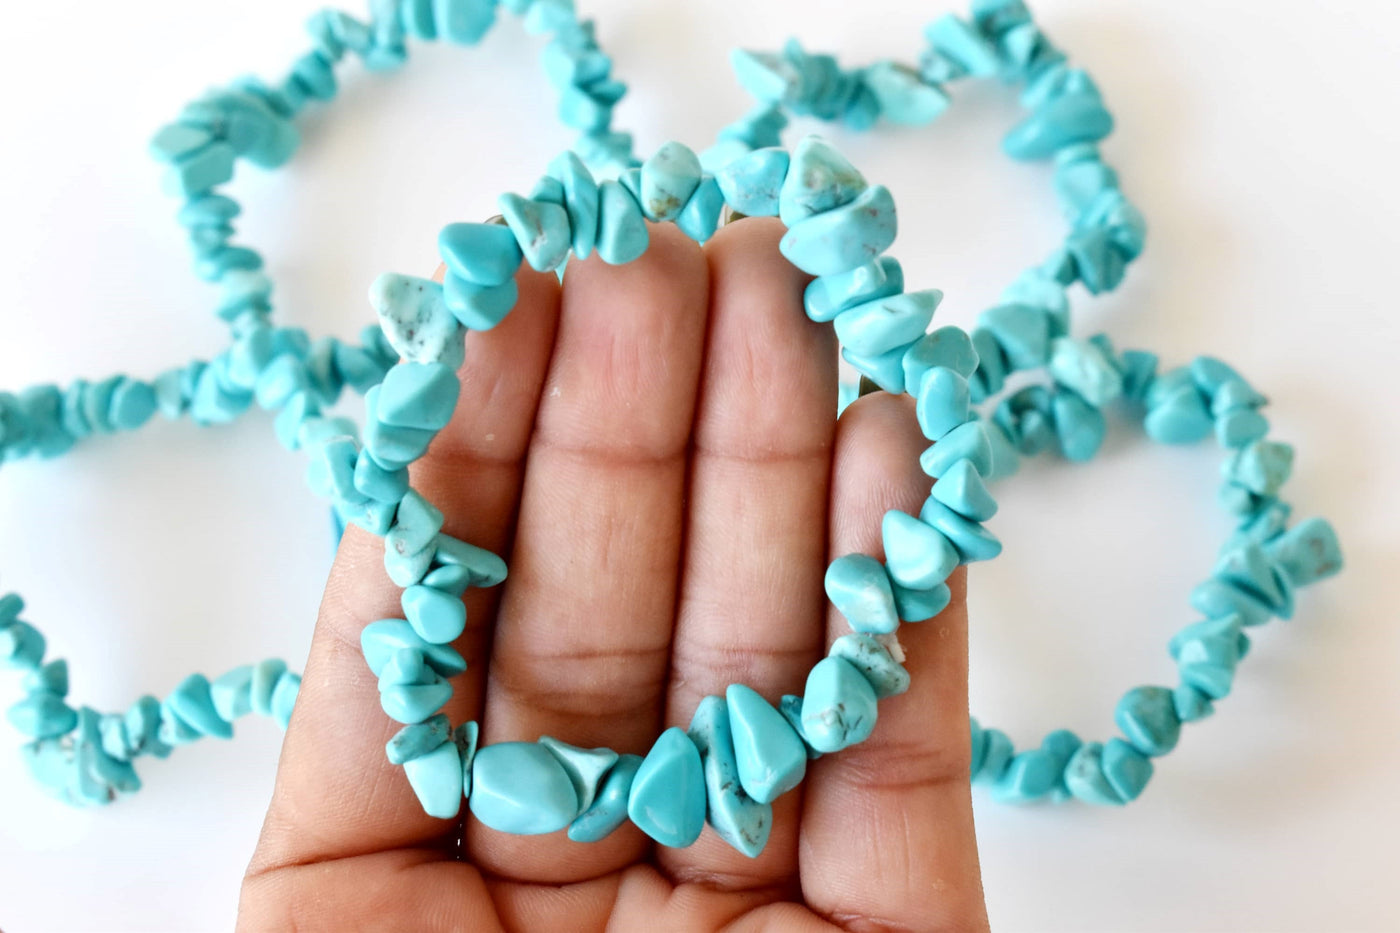 Turquoise Chip Bracelet (Travel  and Enhancing)